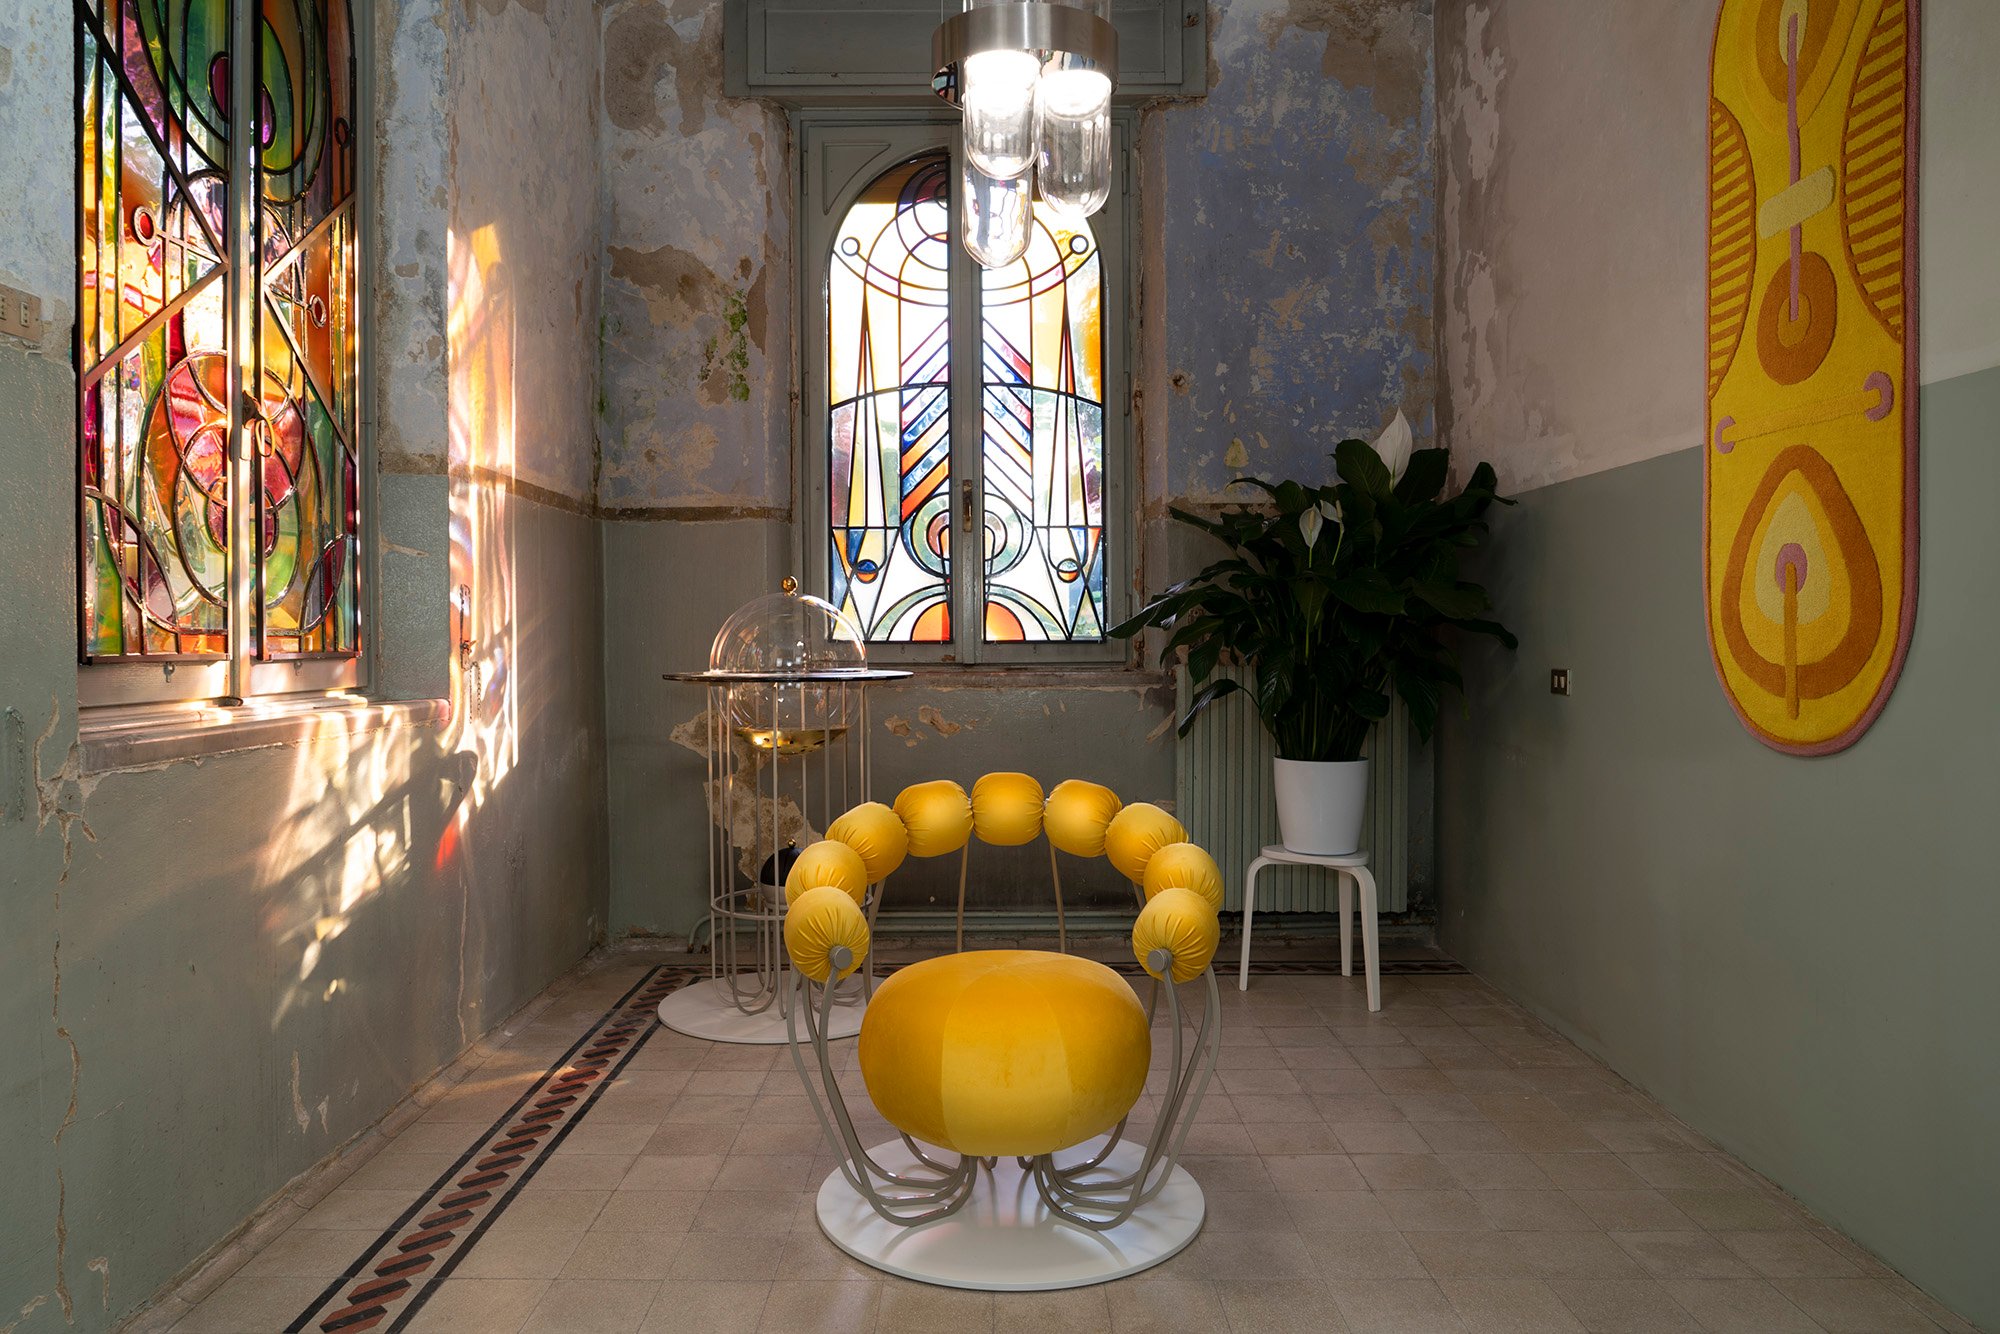 An image of a yellow chair in the middle of a room with stained glass windows